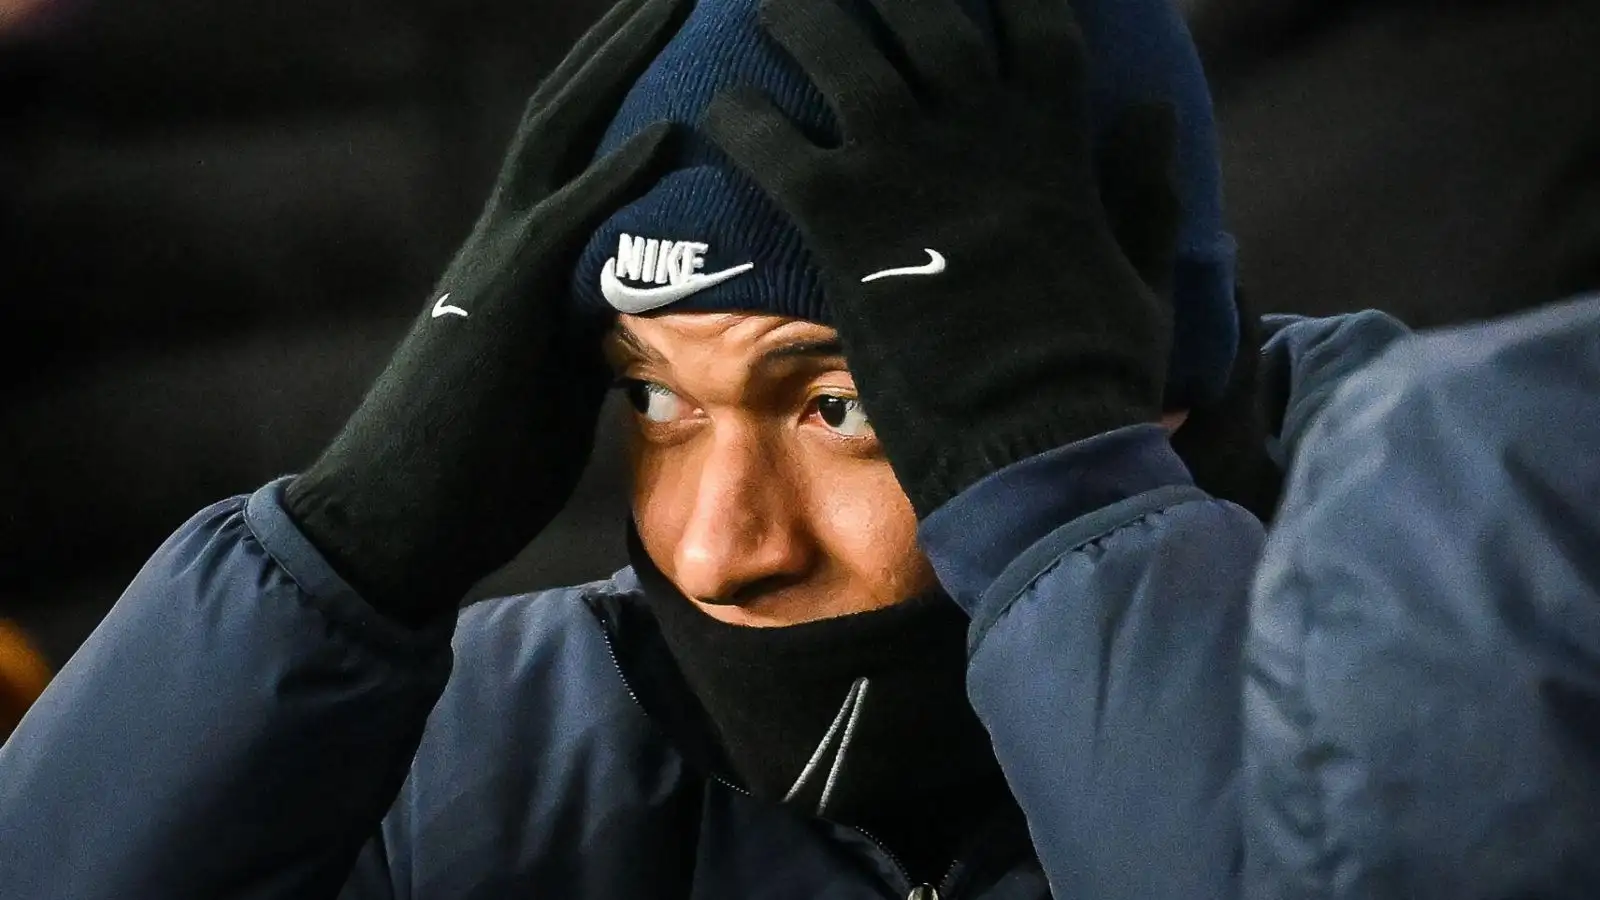 Arsenal and Liverpool-linked PSG forward Kylian Mbappe covers upwards sunny on the pew.